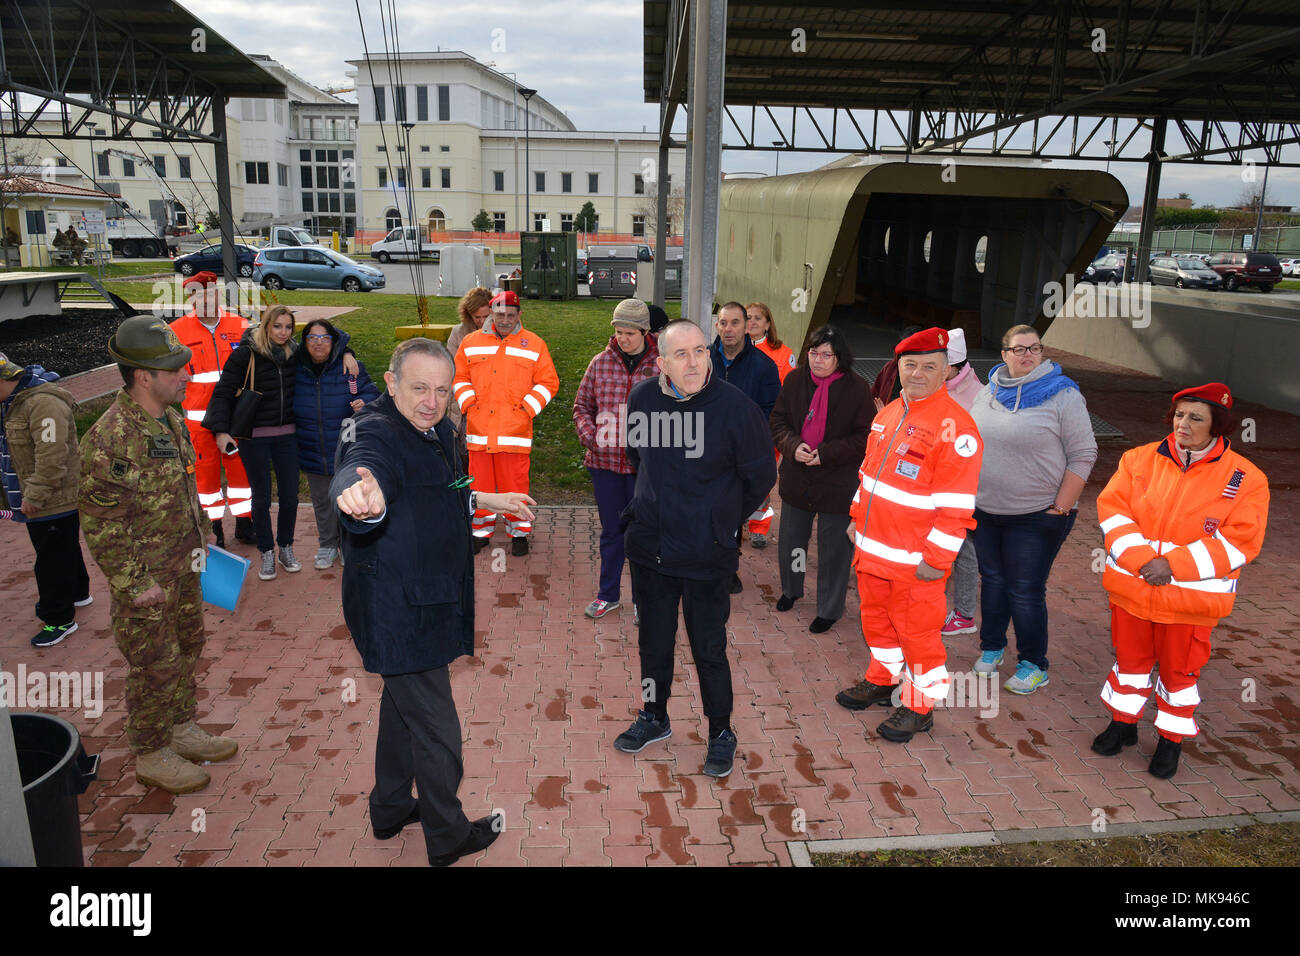 Ivano Trevisanutto, chief, Training Support Center Italy, shows the training facility area to a delegation from “Associazione Il Nuovo Ponte” and Sovereign Military Order, during a visit to Caserma Ederle Nov. 28, 2017. Associazione Il Nuovo Ponte is a social solidarity cooperative that since 1984 runs Social-Health Services for people with disabilities. (U.S. Army photo by Paolo Bovo) Stock Photo